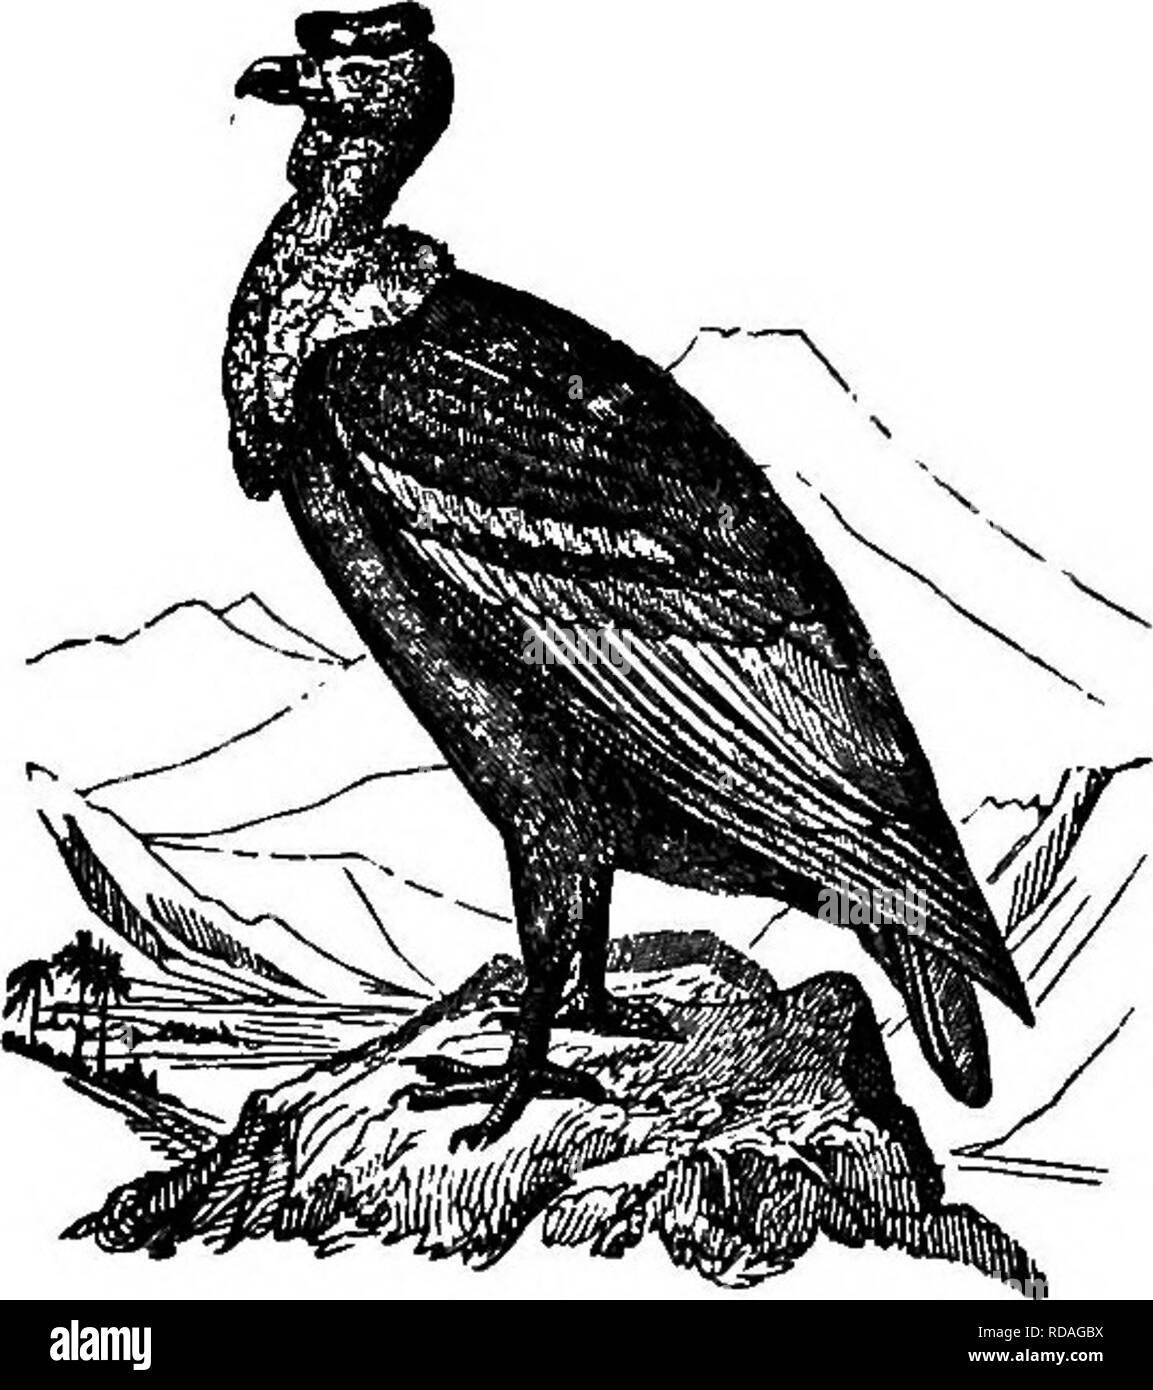 Illustrated natural : comprising descriptions of animals, birds, fishes, reptiles, insects, etc., with of their peculiar habits and characteristics . Zoology. 2oe VERTEBRATES.. Condor. powerful to carry